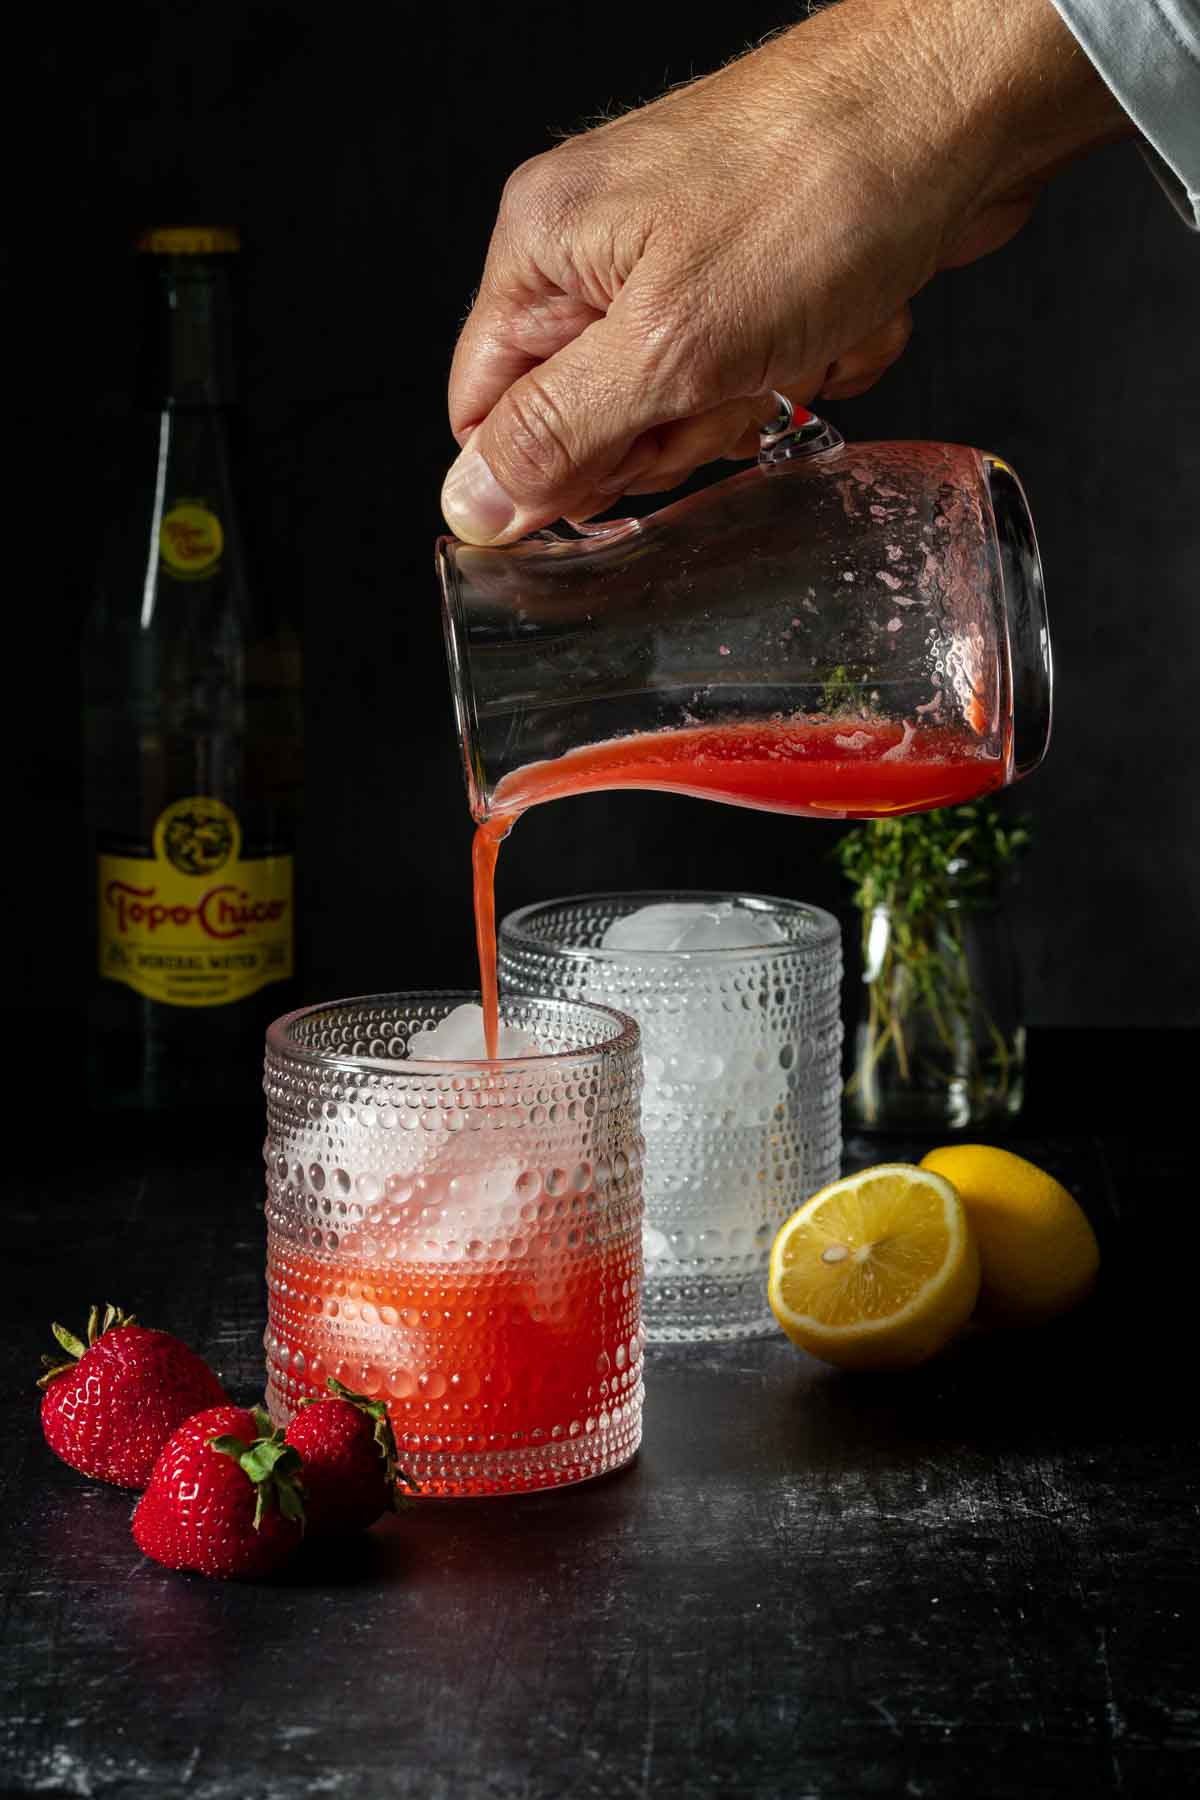 A hand filling up a cocktail glass with a red liquid over ice.